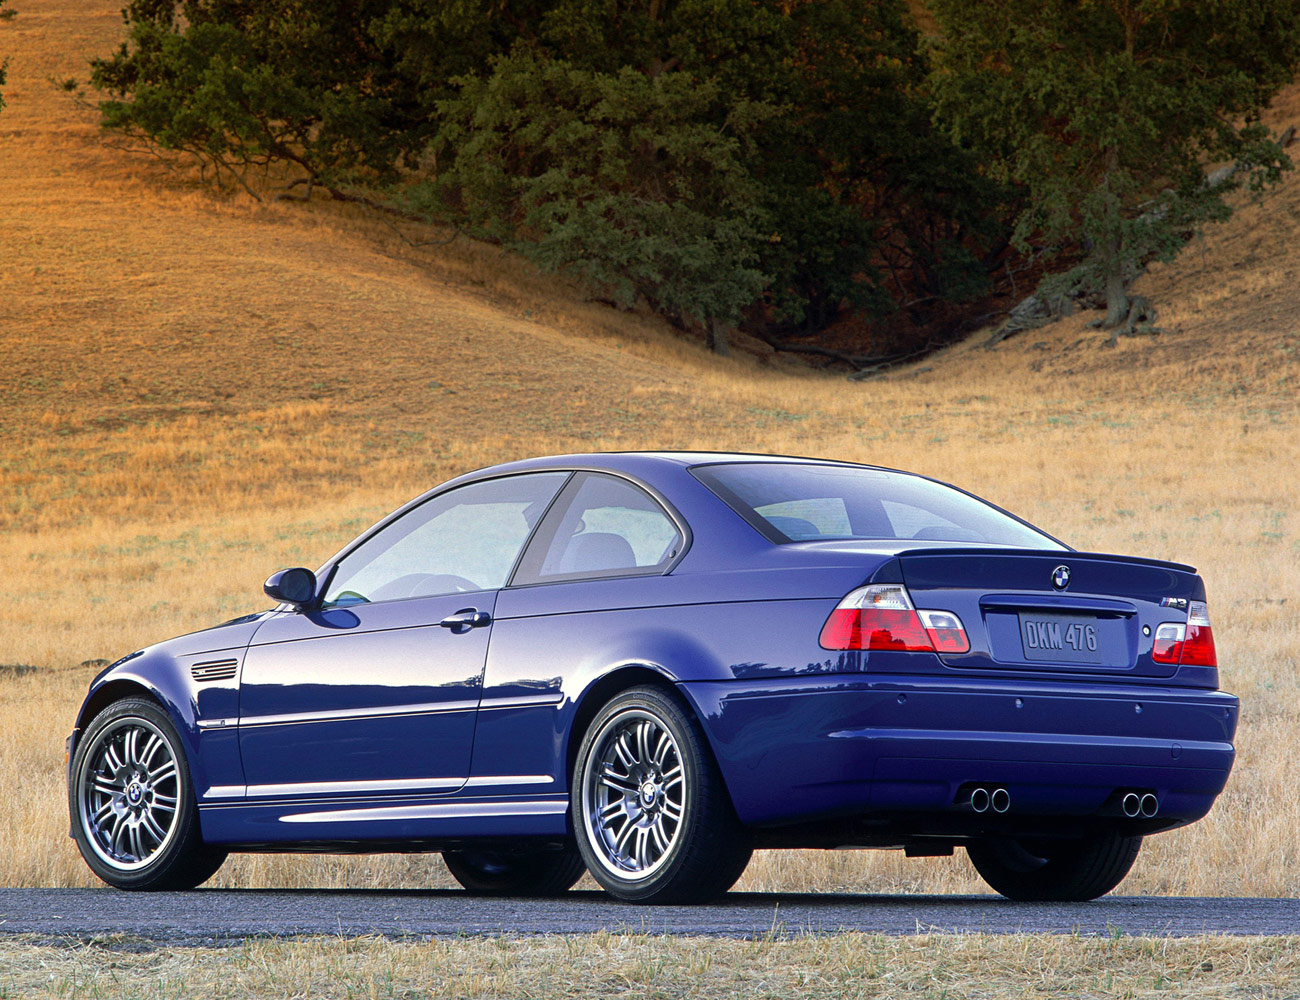 10 Cool Cars From the 2000s Sure to Become Future Classics